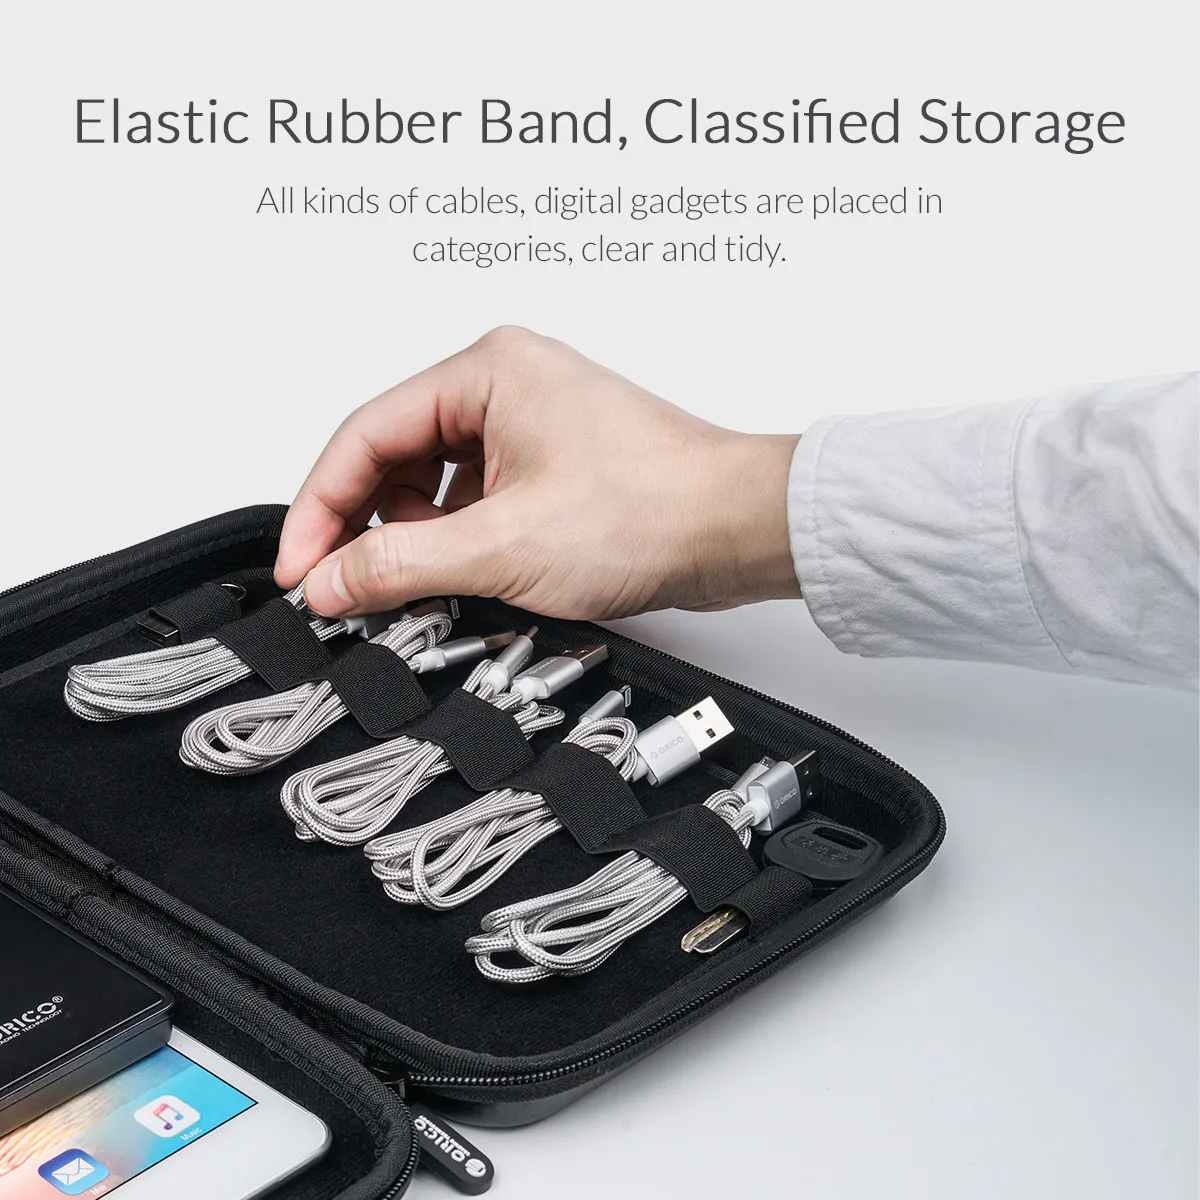 stylish laptop bags ORICO Tablet Portable Storage Bag Shockproof Pouch Travel bag For iPad kindle Hard Drive HDD Earphone Power bank U disk Mouse 17 inch laptop sleeve